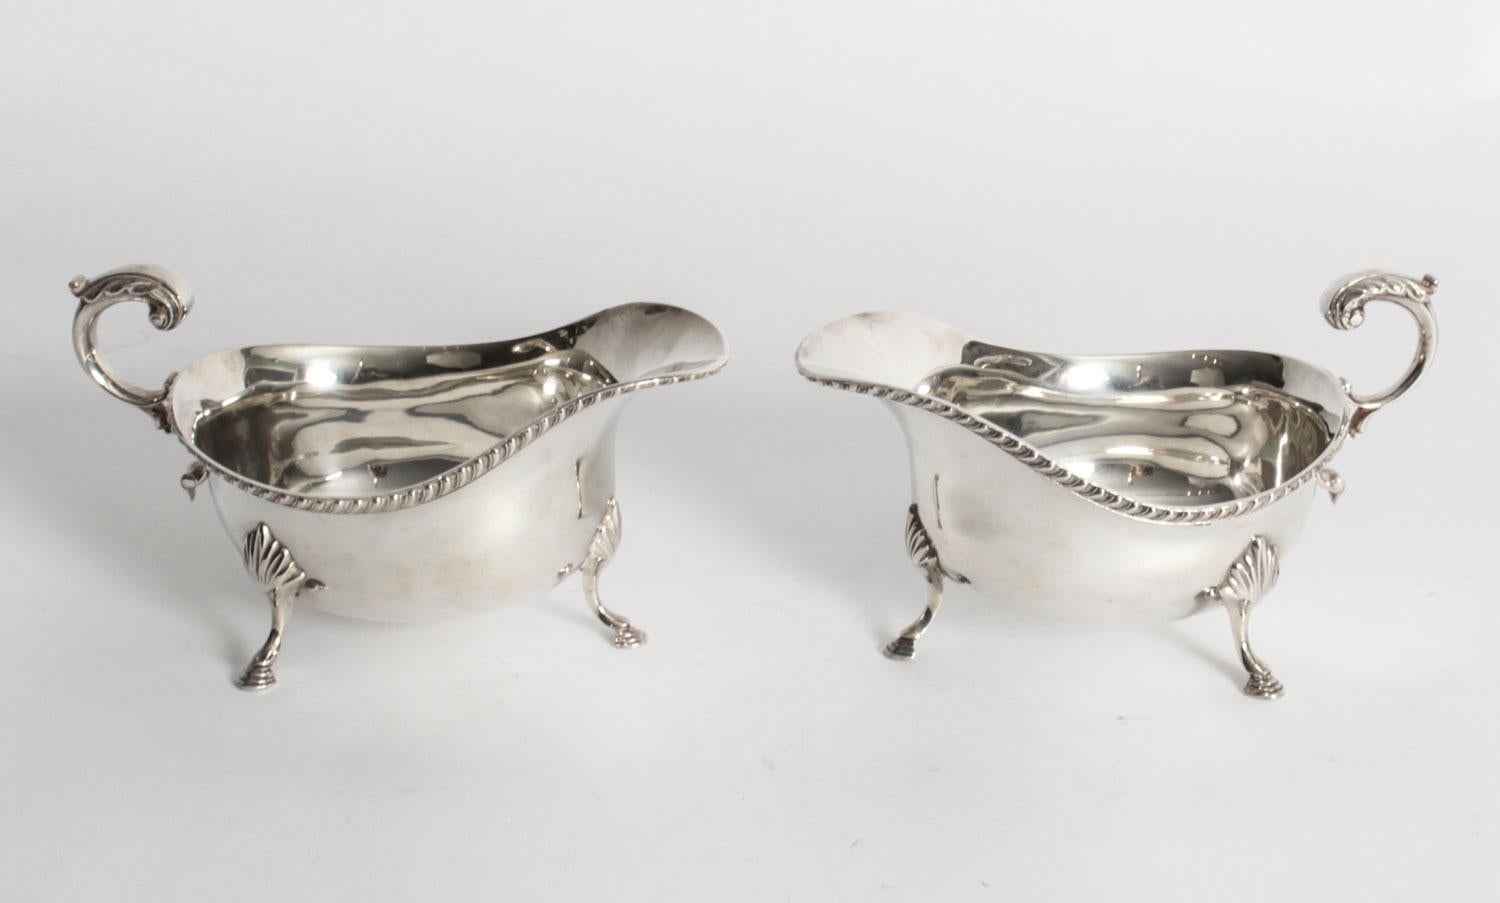 This is a magnificent antique pair of silver-plated Dunstan Plate sauce boats by the renowned Silversmith C.J.Vander, Circa 1900 in date.
 
Condition:
In excellent condition with clear makers marks and no dings, dents or signs of repair. Please